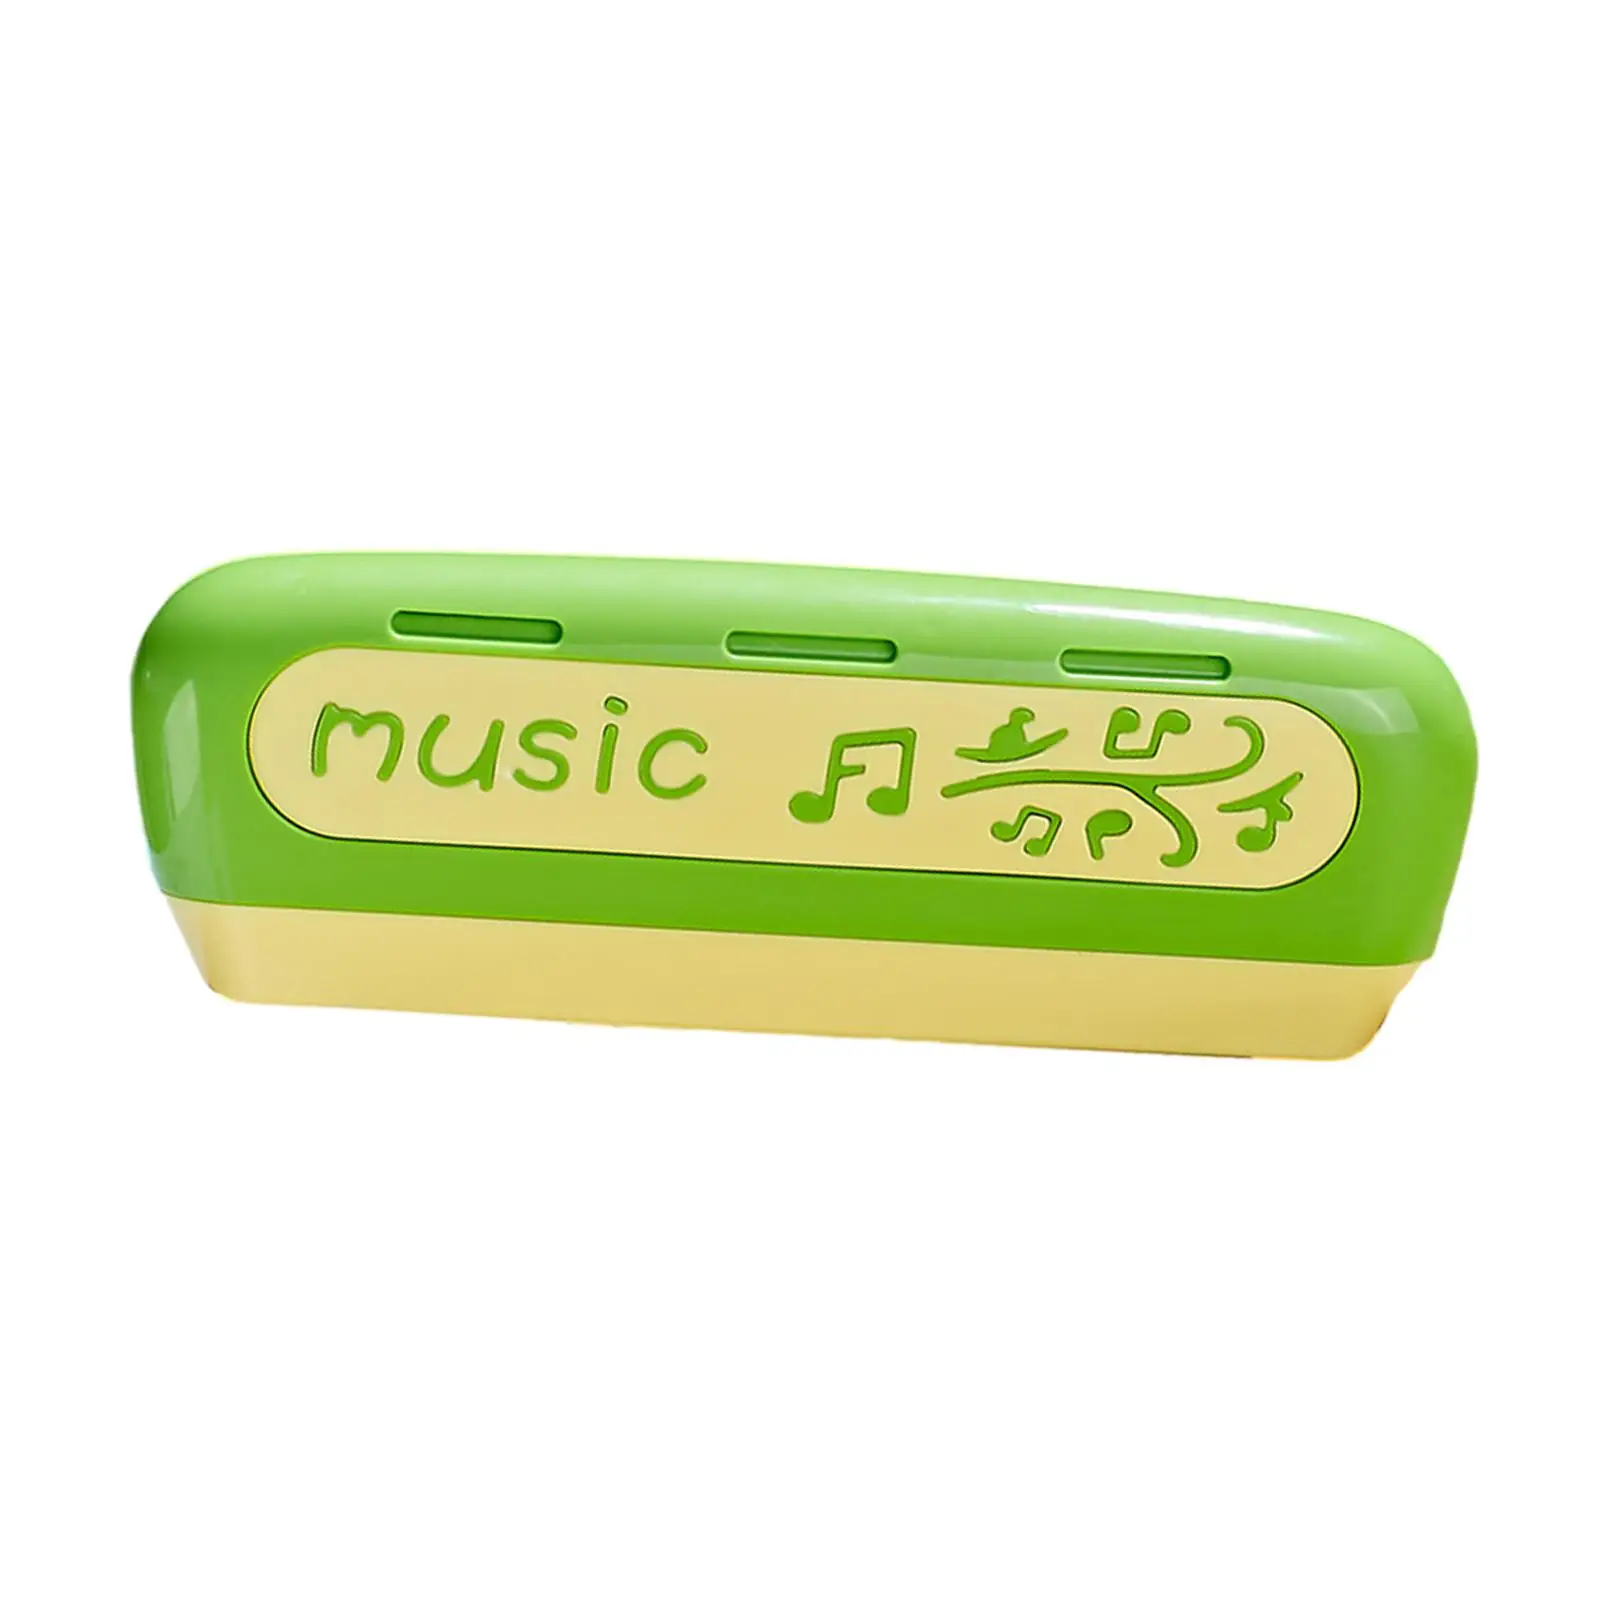 Kids Harmonica Musical Instrument Play Toy, Portable Mouth Organ 16 Holes Harmonica for Classroom, Activity Stage Family Kids